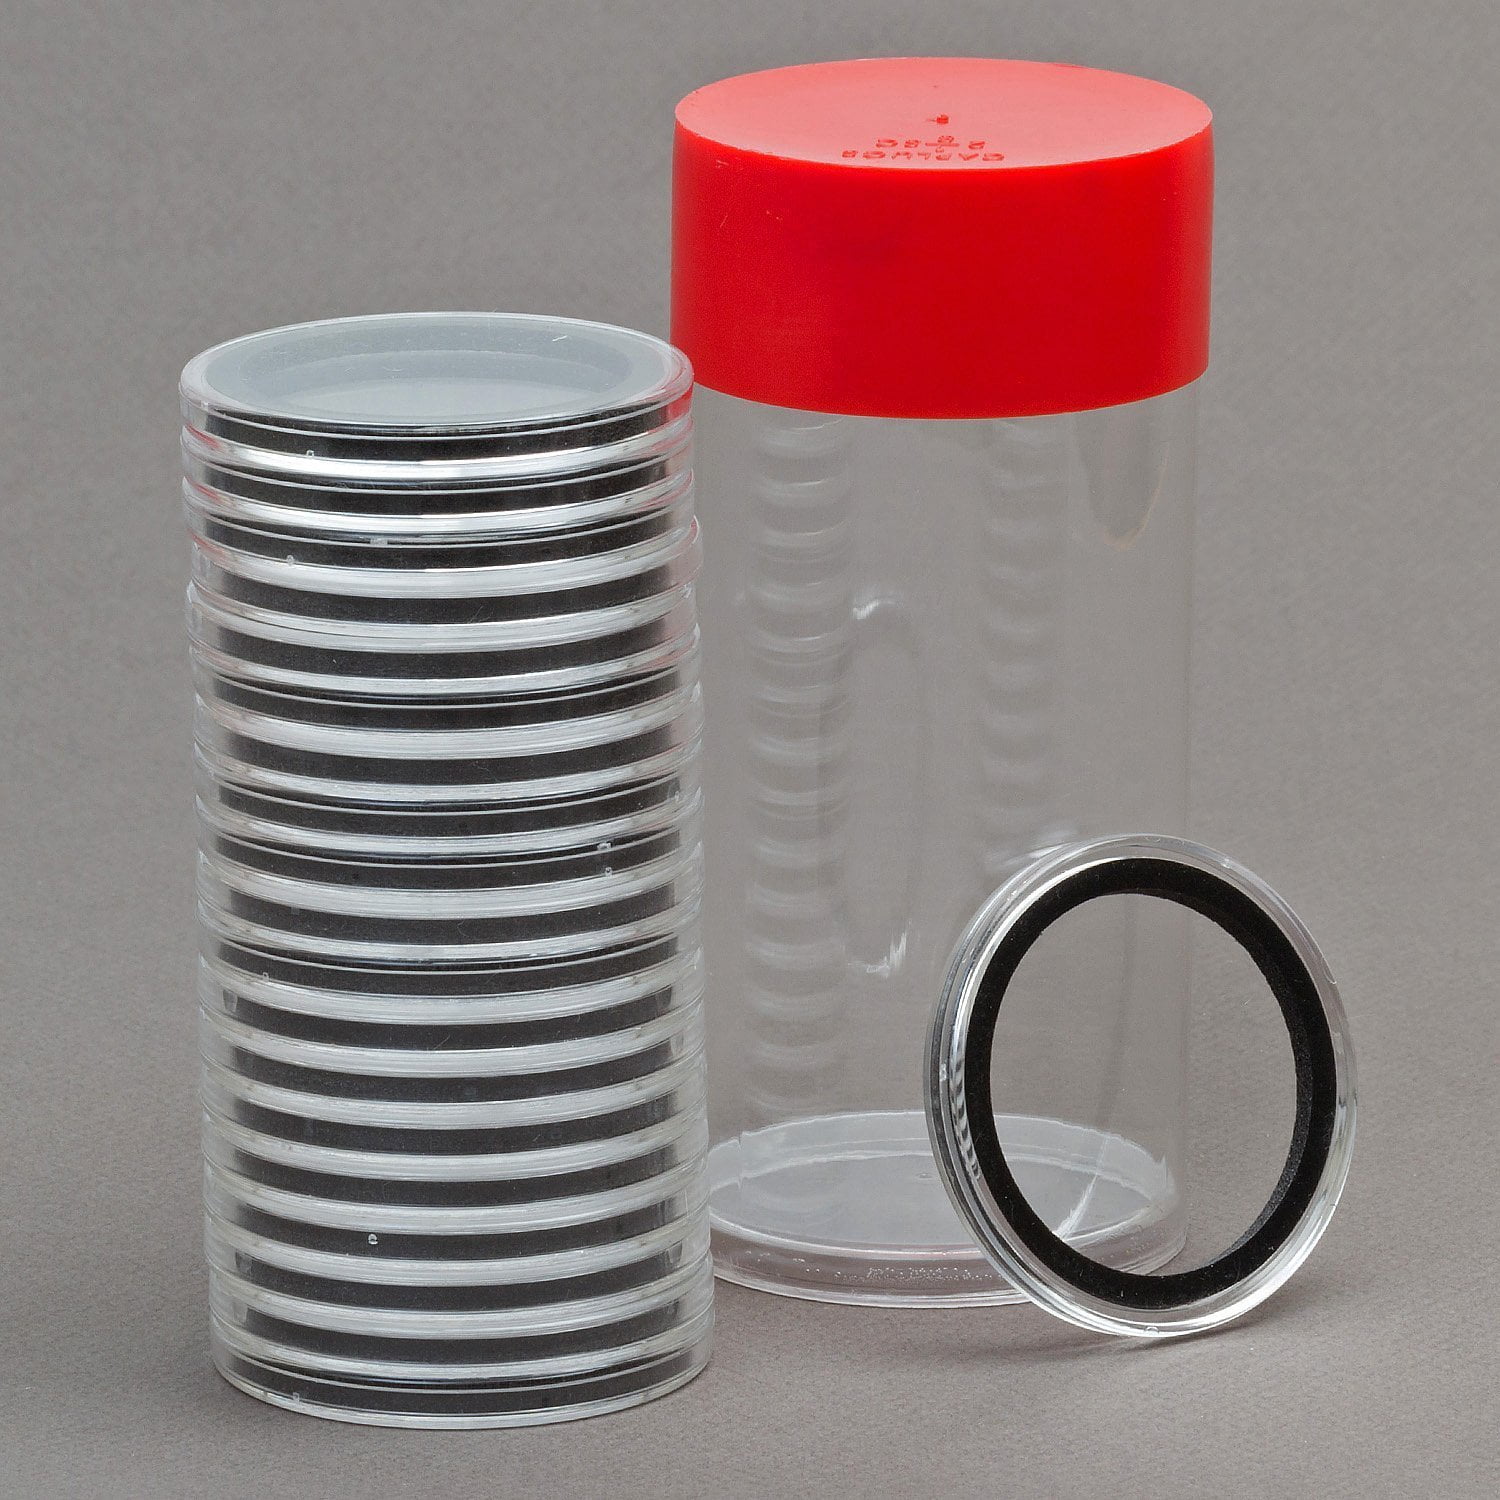 Details about   5 AirTite BLACK Ring Coin Capsules For Small 27mm Coins Crystal Clear Storage 